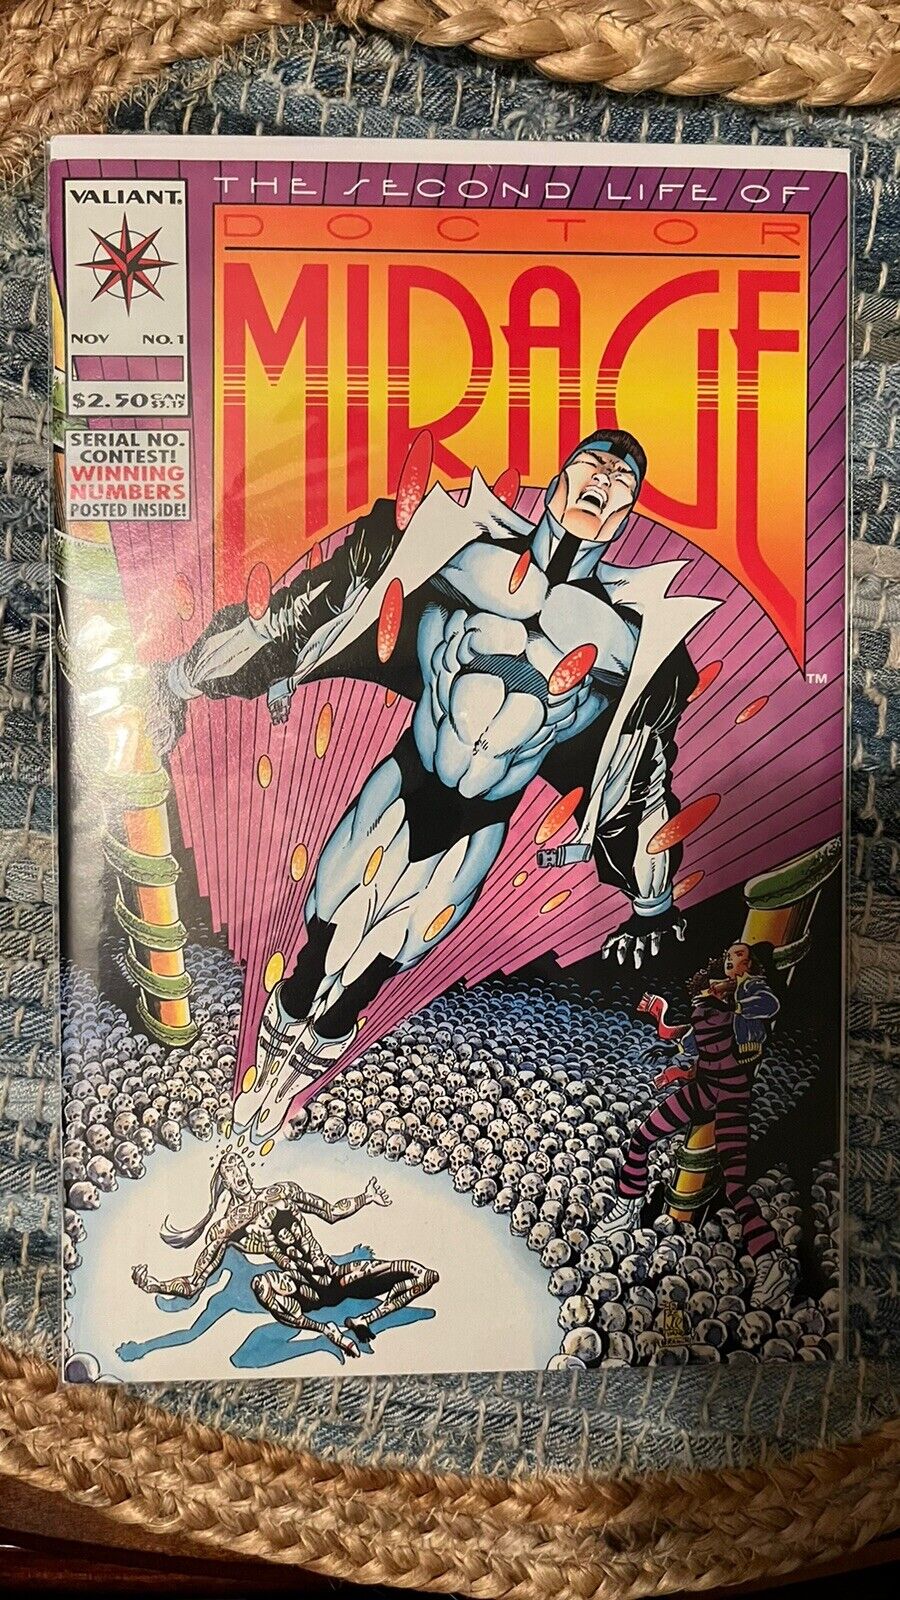 The Second Life of Doctor Mirage #1 (Nov 1993, Acclaim / Valiant) N/M Condition